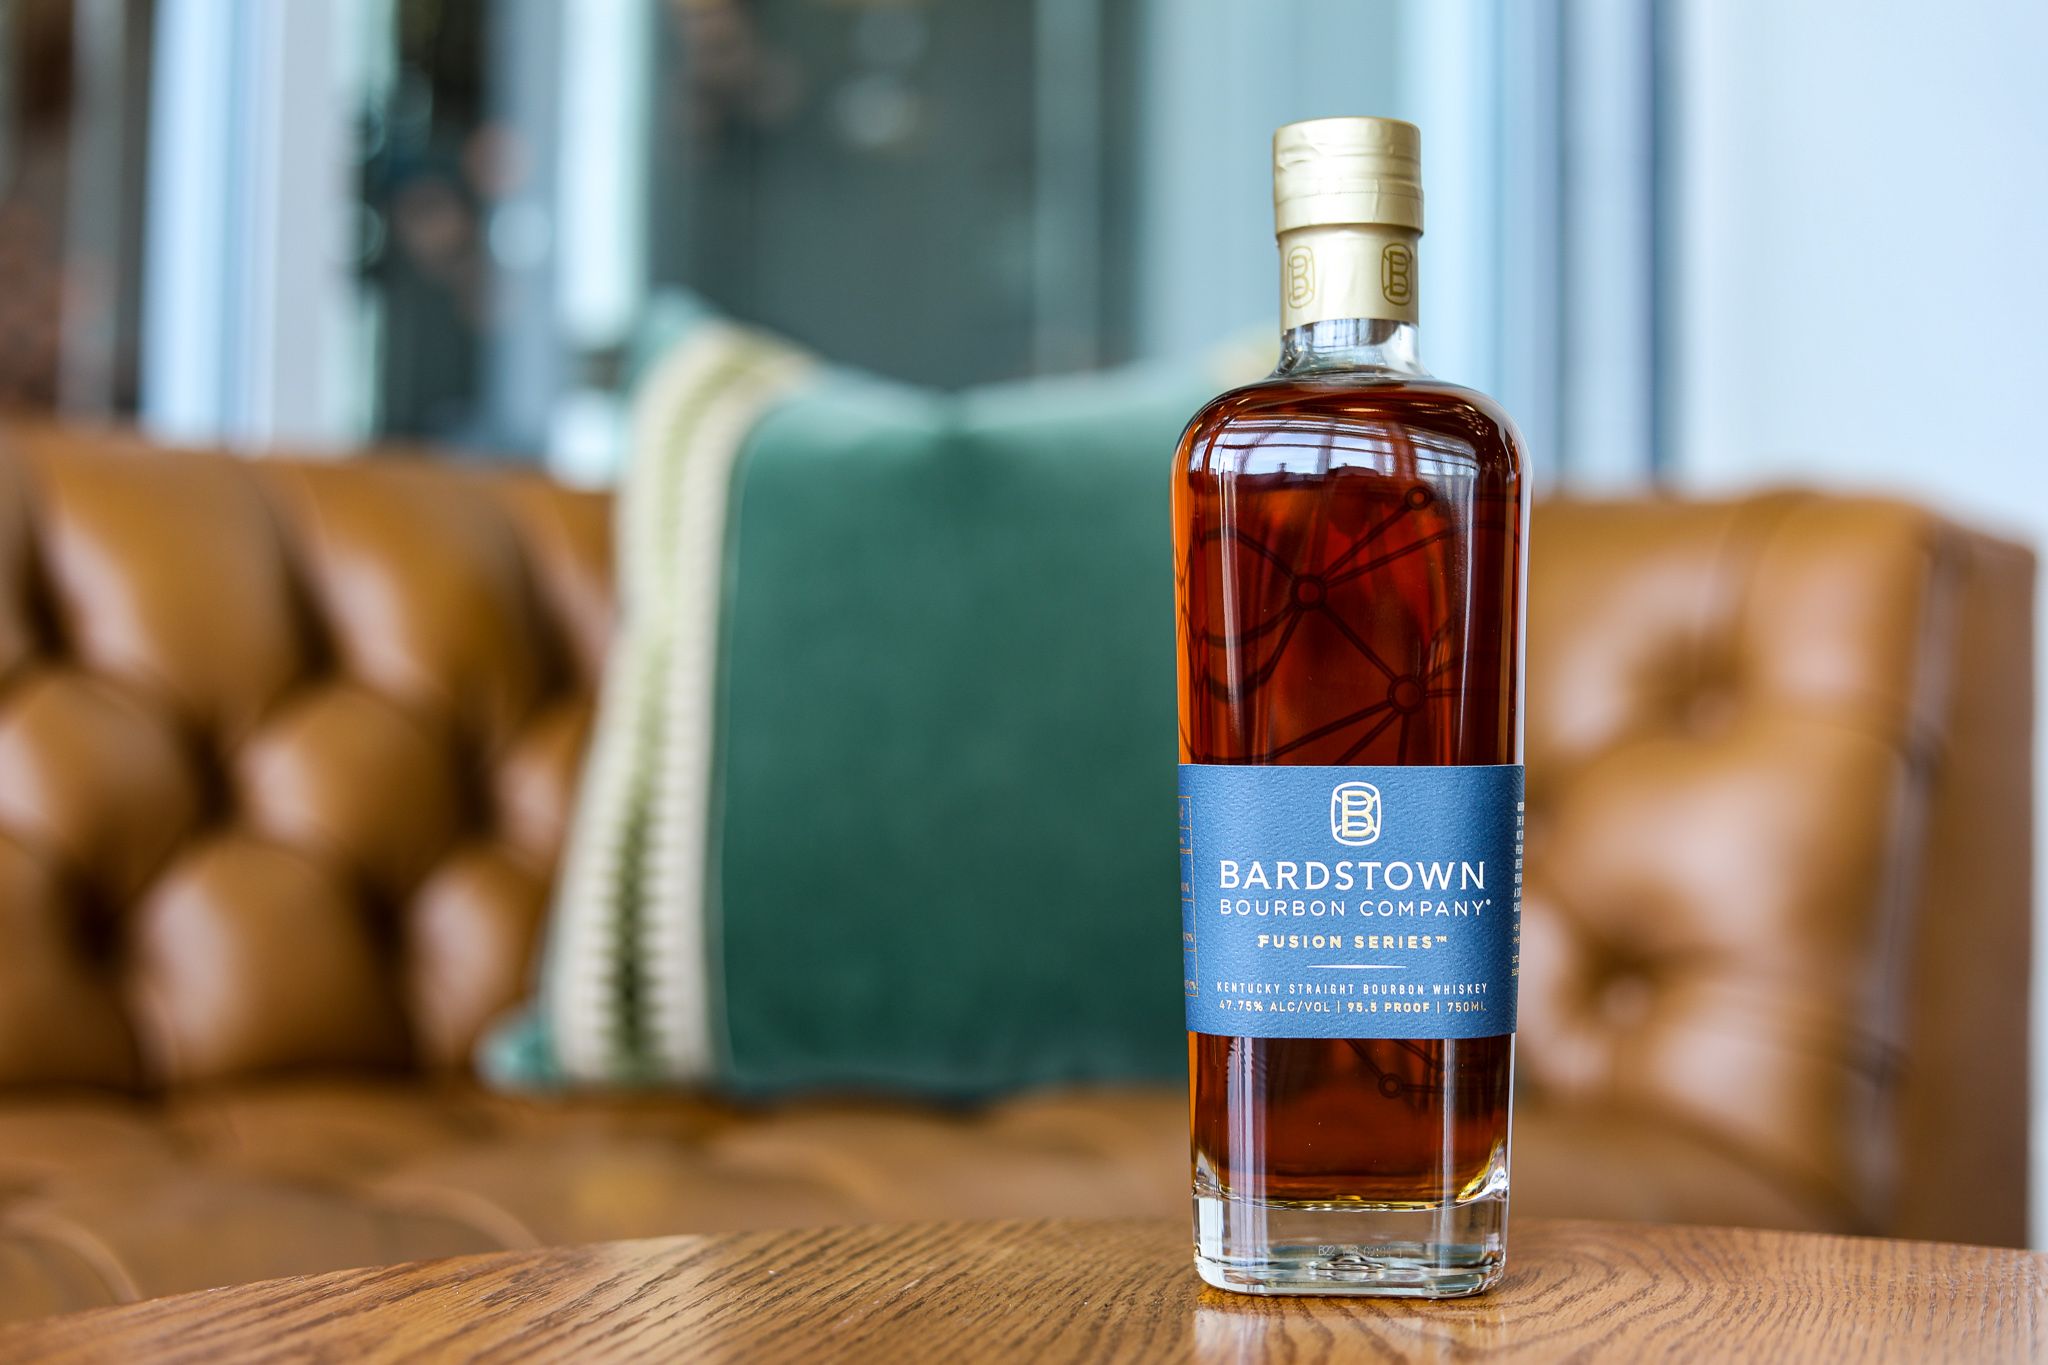 Bardstown Bourbon Company: The Penultimate Fusion Series